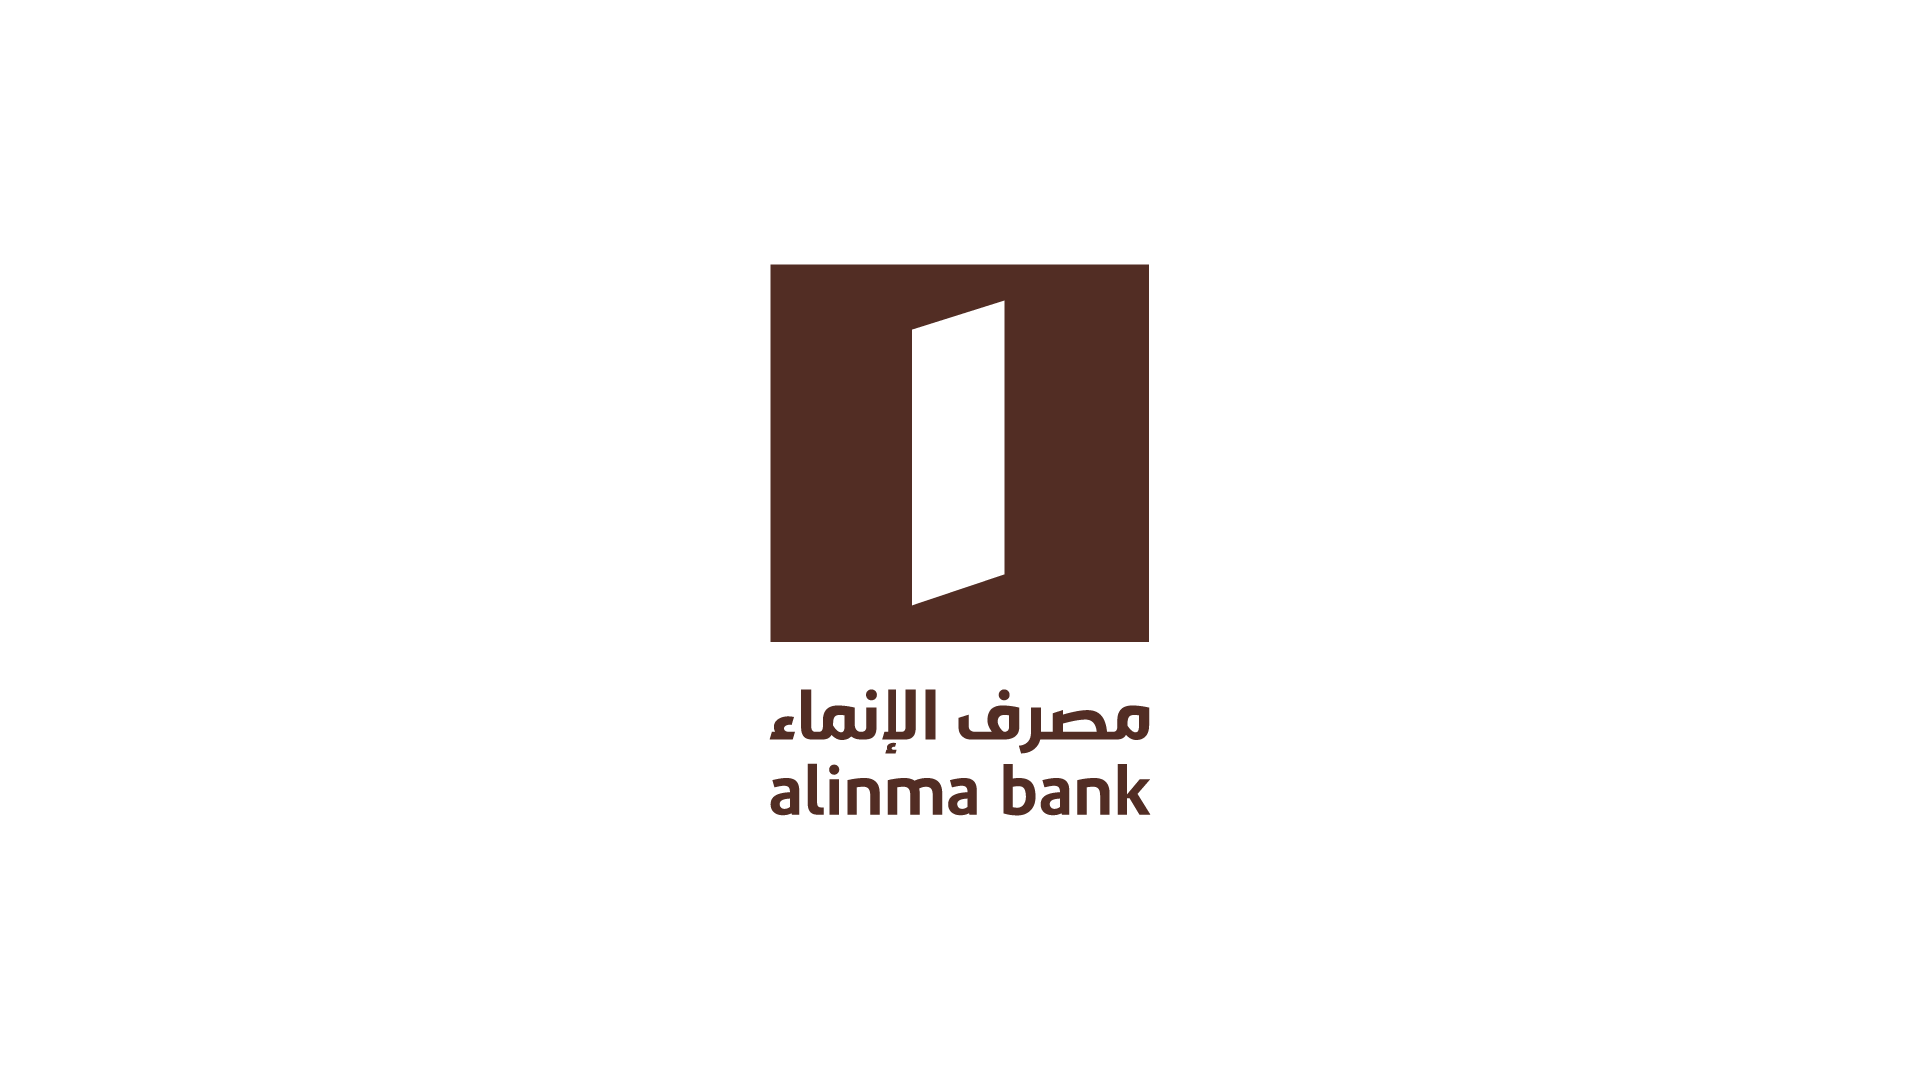 Alinma Bank sponsors the journey to ISEF in collaboration with (Mawhiba)